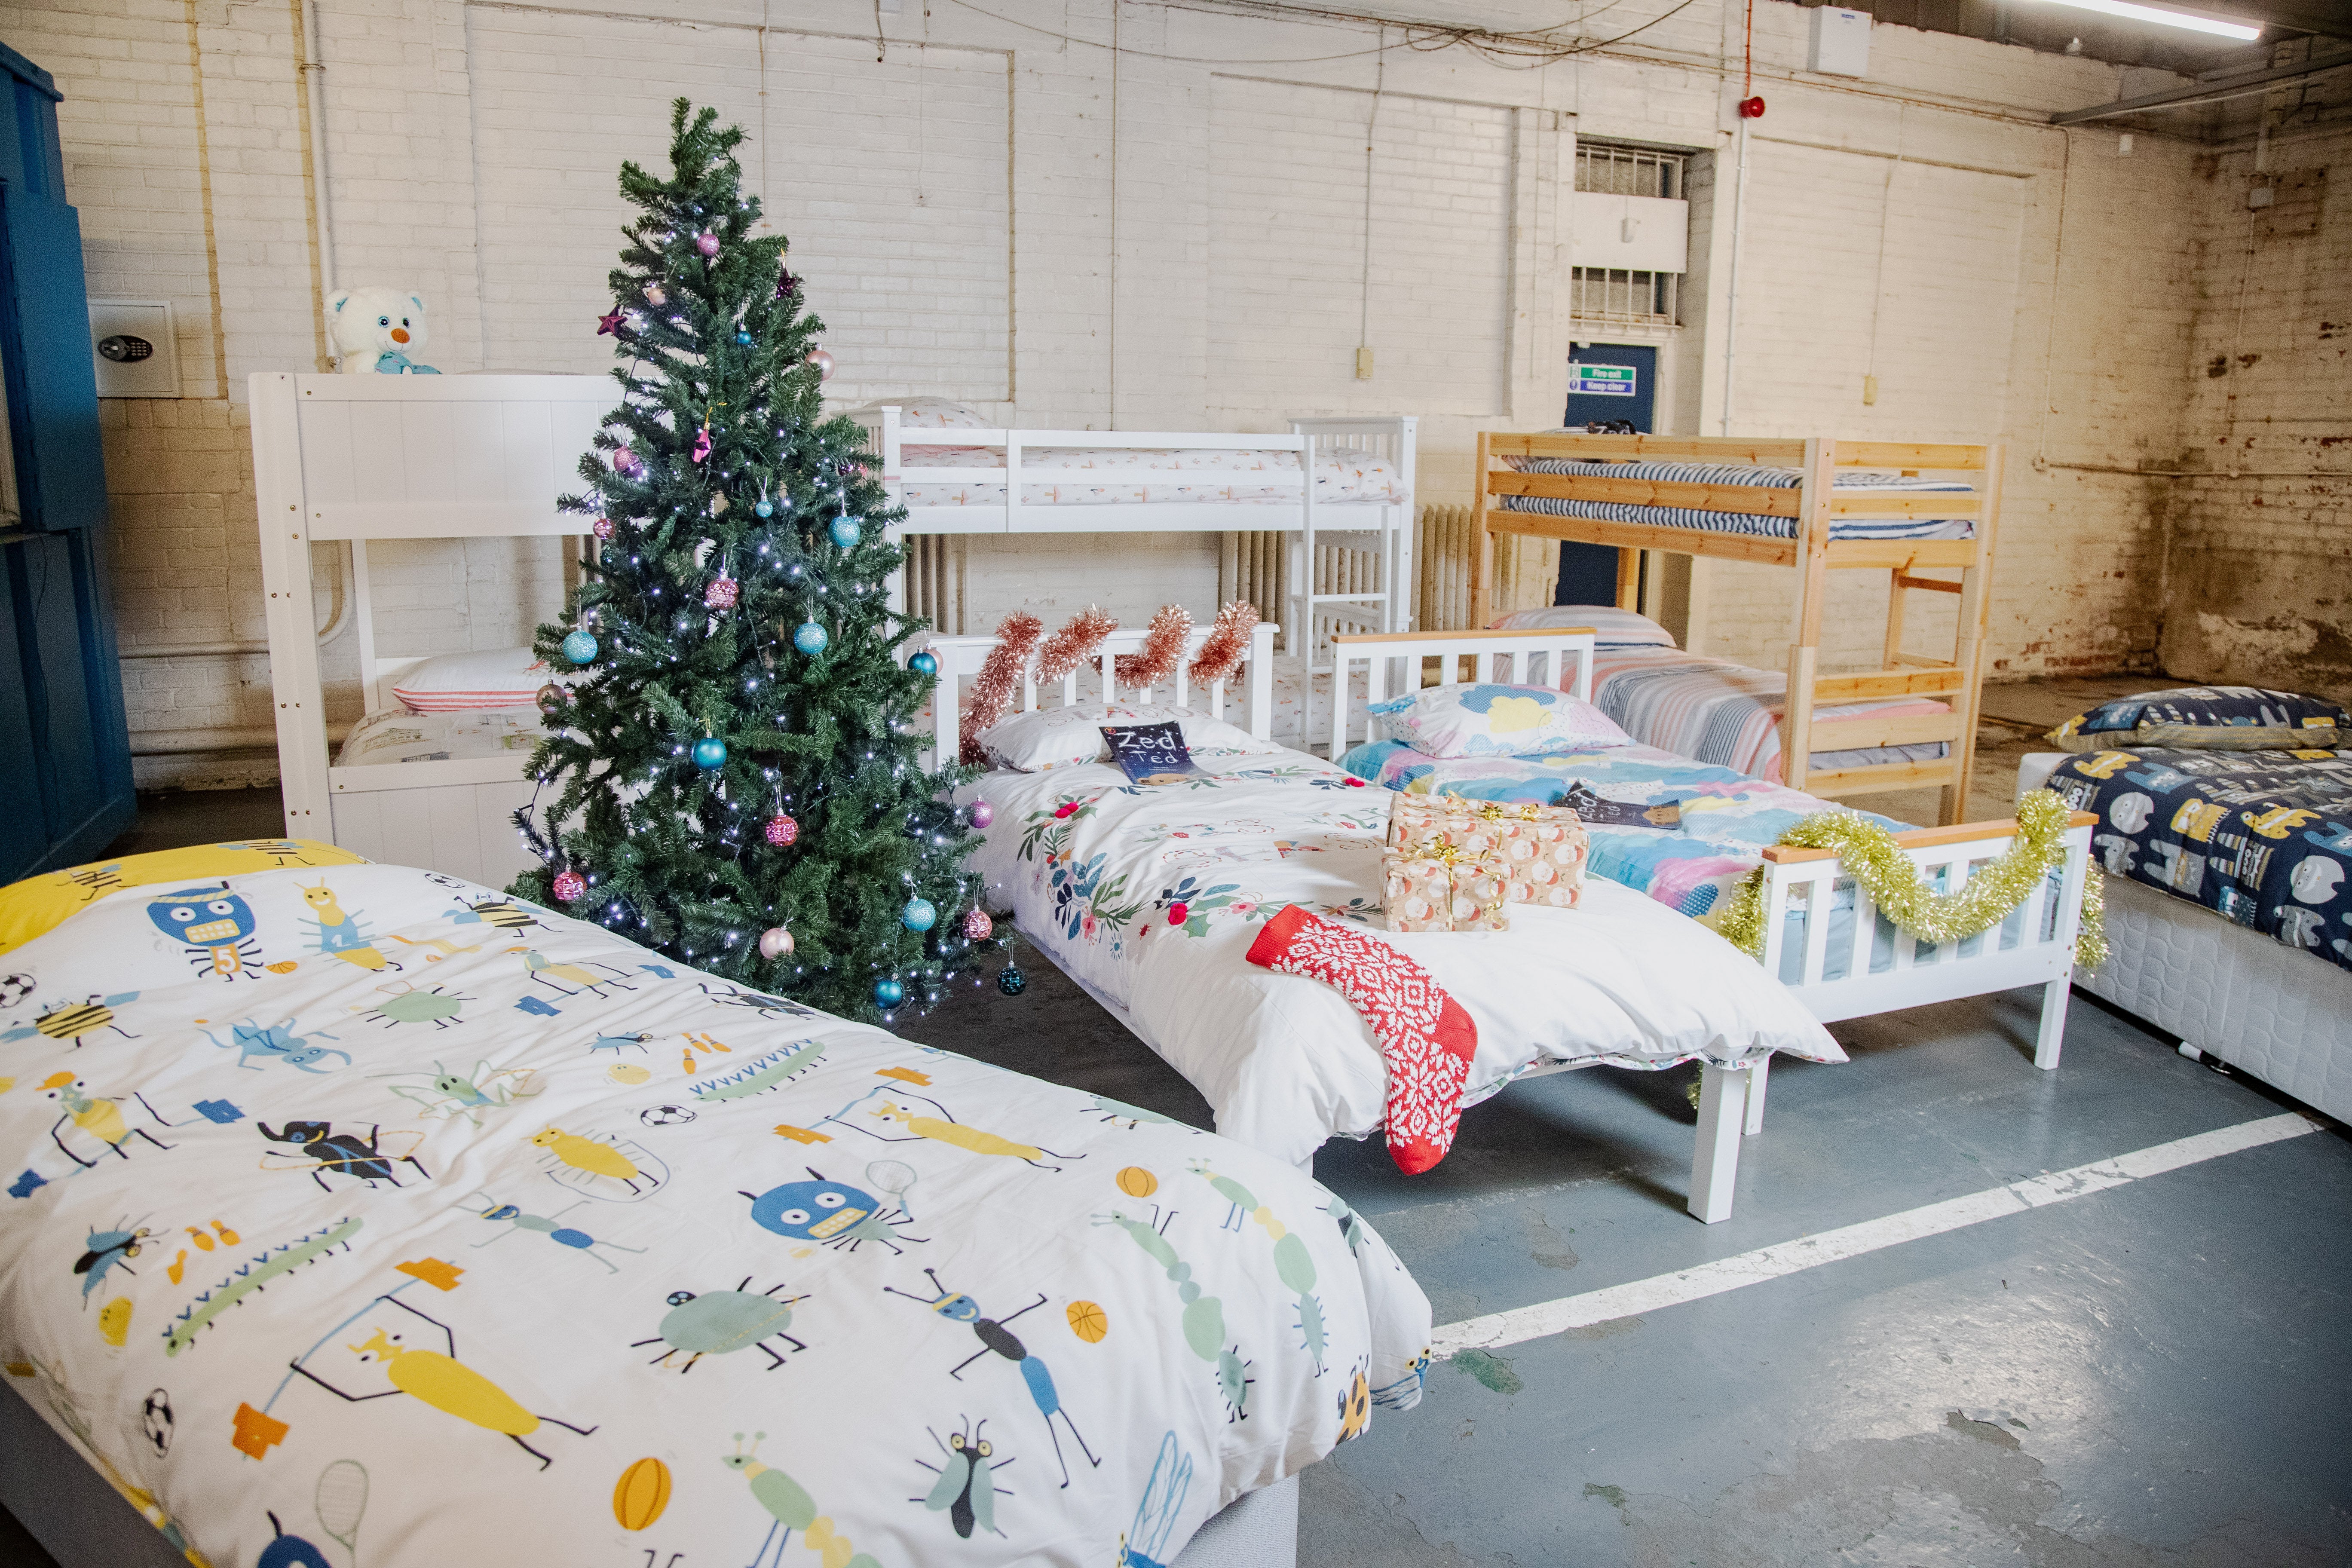 The charity’s HQ is a grotto of beds, pillows, pyjamas, duvets, toothbrushes and chocolate treats